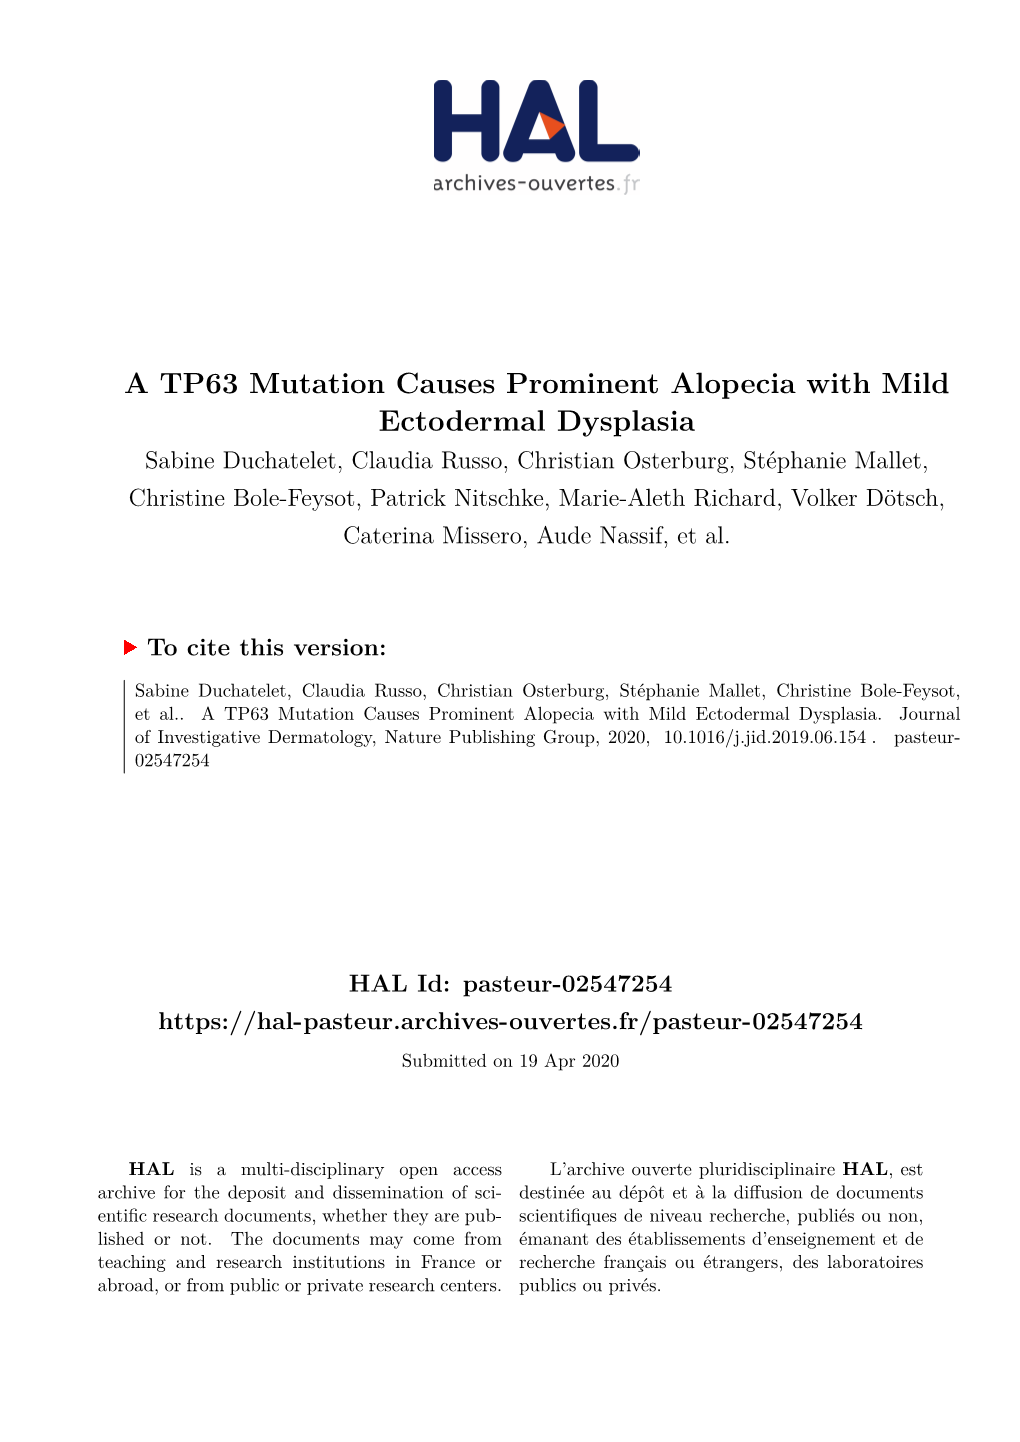 A TP63 Mutation Causes Prominent Alopecia with Mild Ectodermal Dysplasia